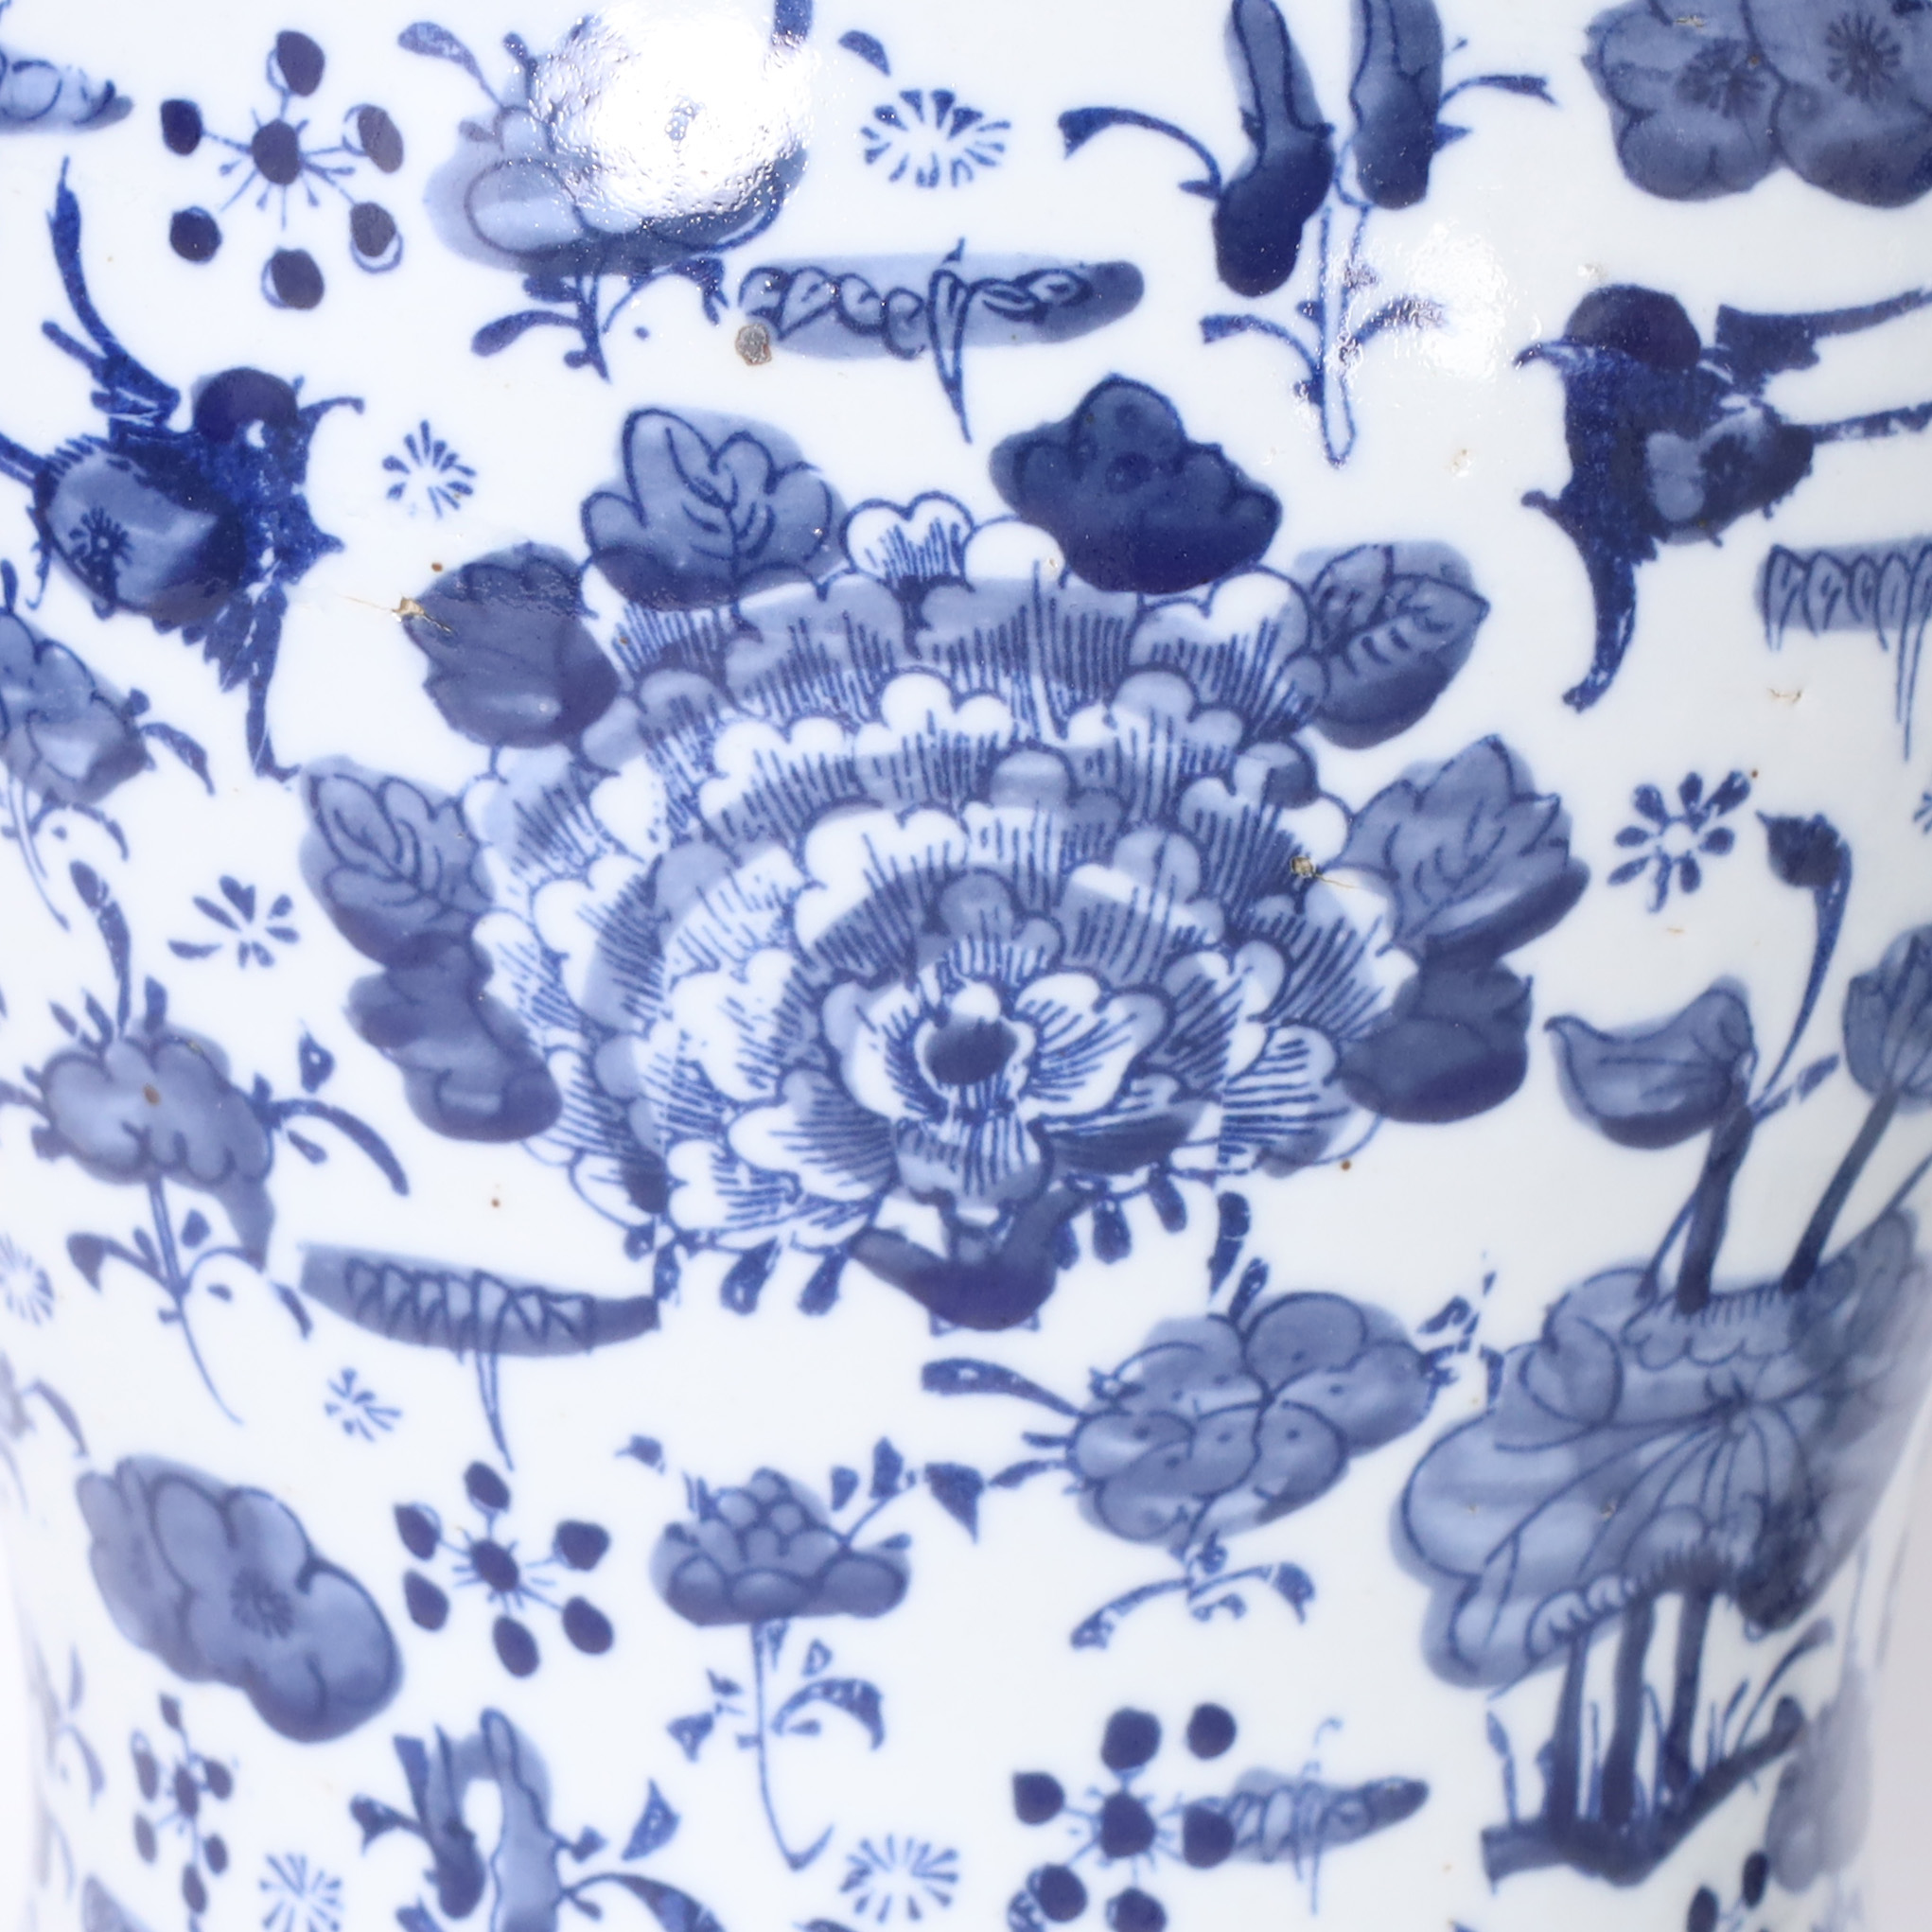 Pair of Chinese Blue and White Porcelain Ginger Jars with Birds and Flowers